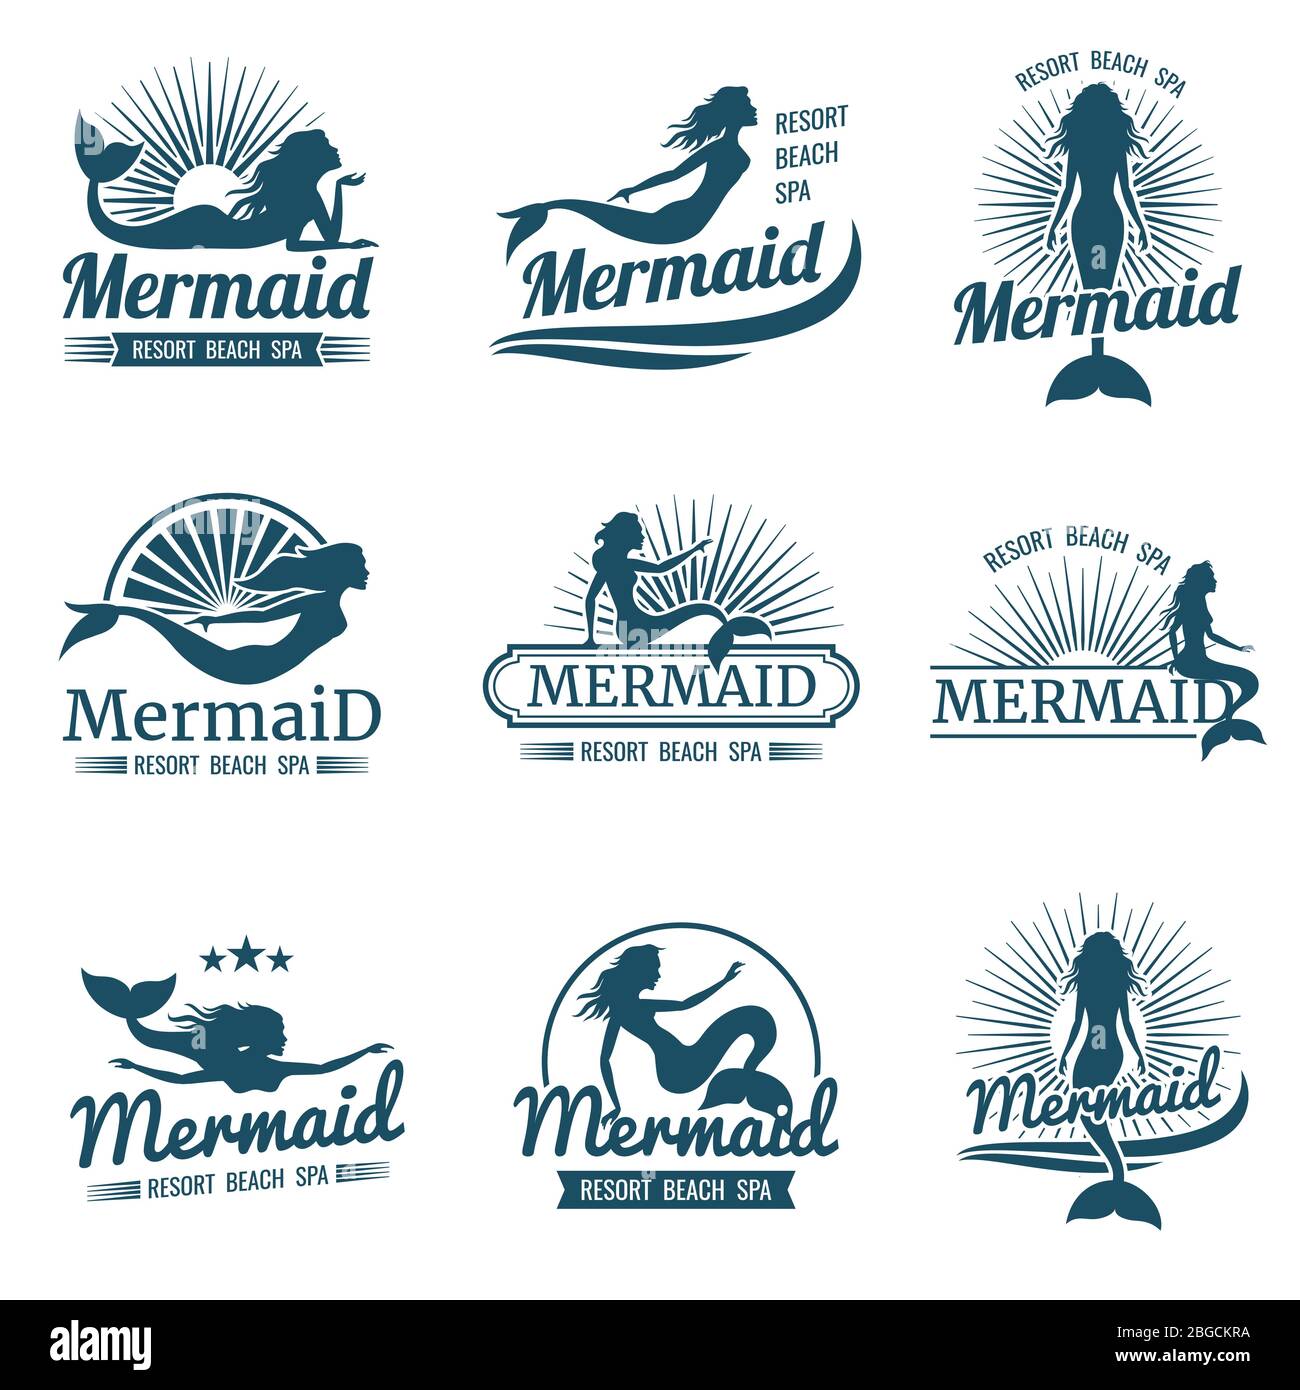 Mermaid silhouette stylized vector logos collection. Mermaid with tail swimming illustration Stock Vector